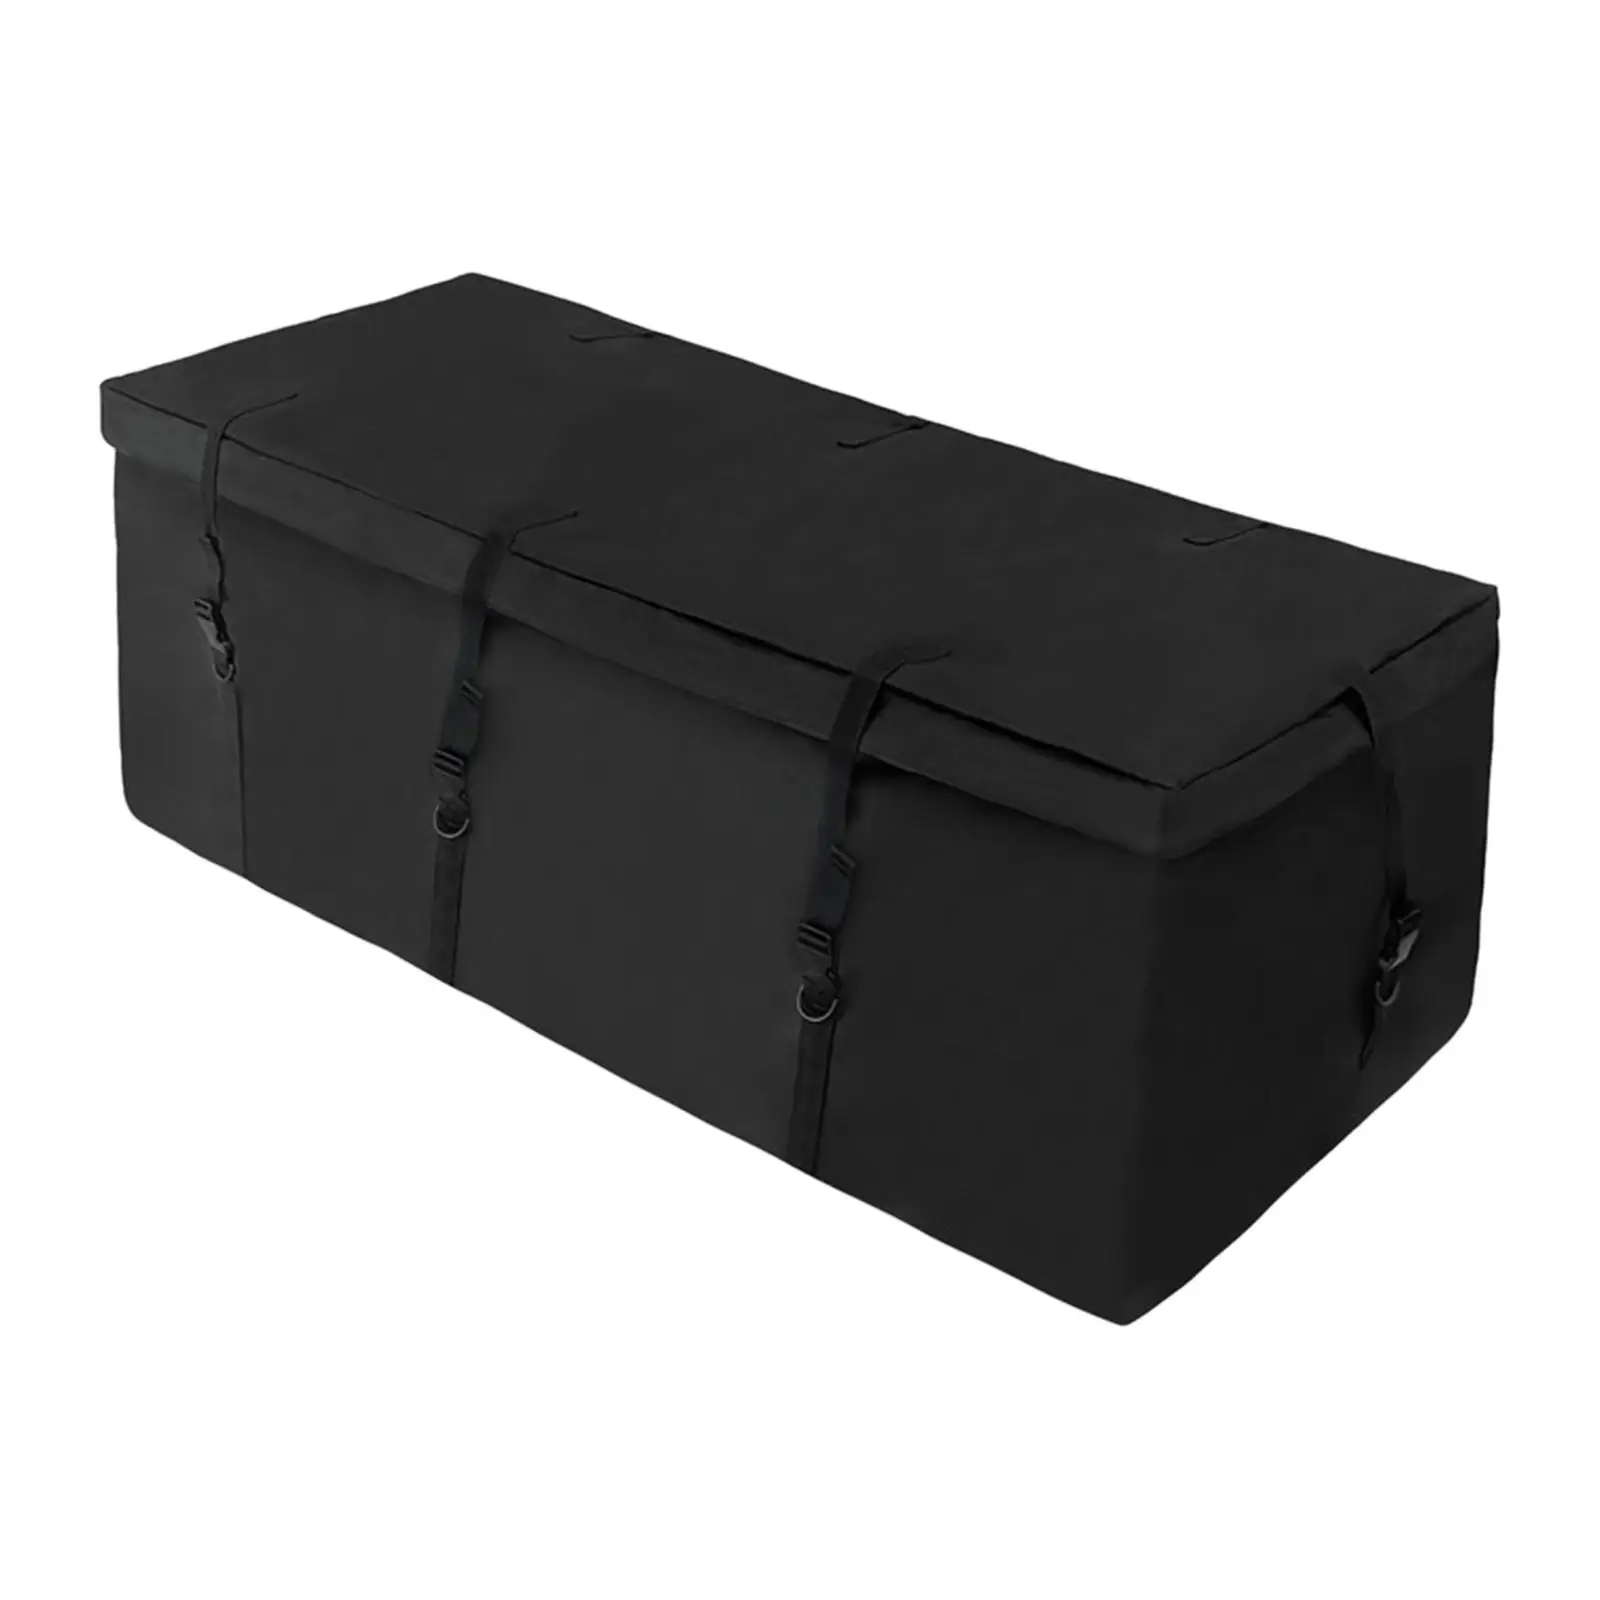 Hitch Cargo Carrier Bag Black Cargo Traveling Bag for Truck All Vehicle